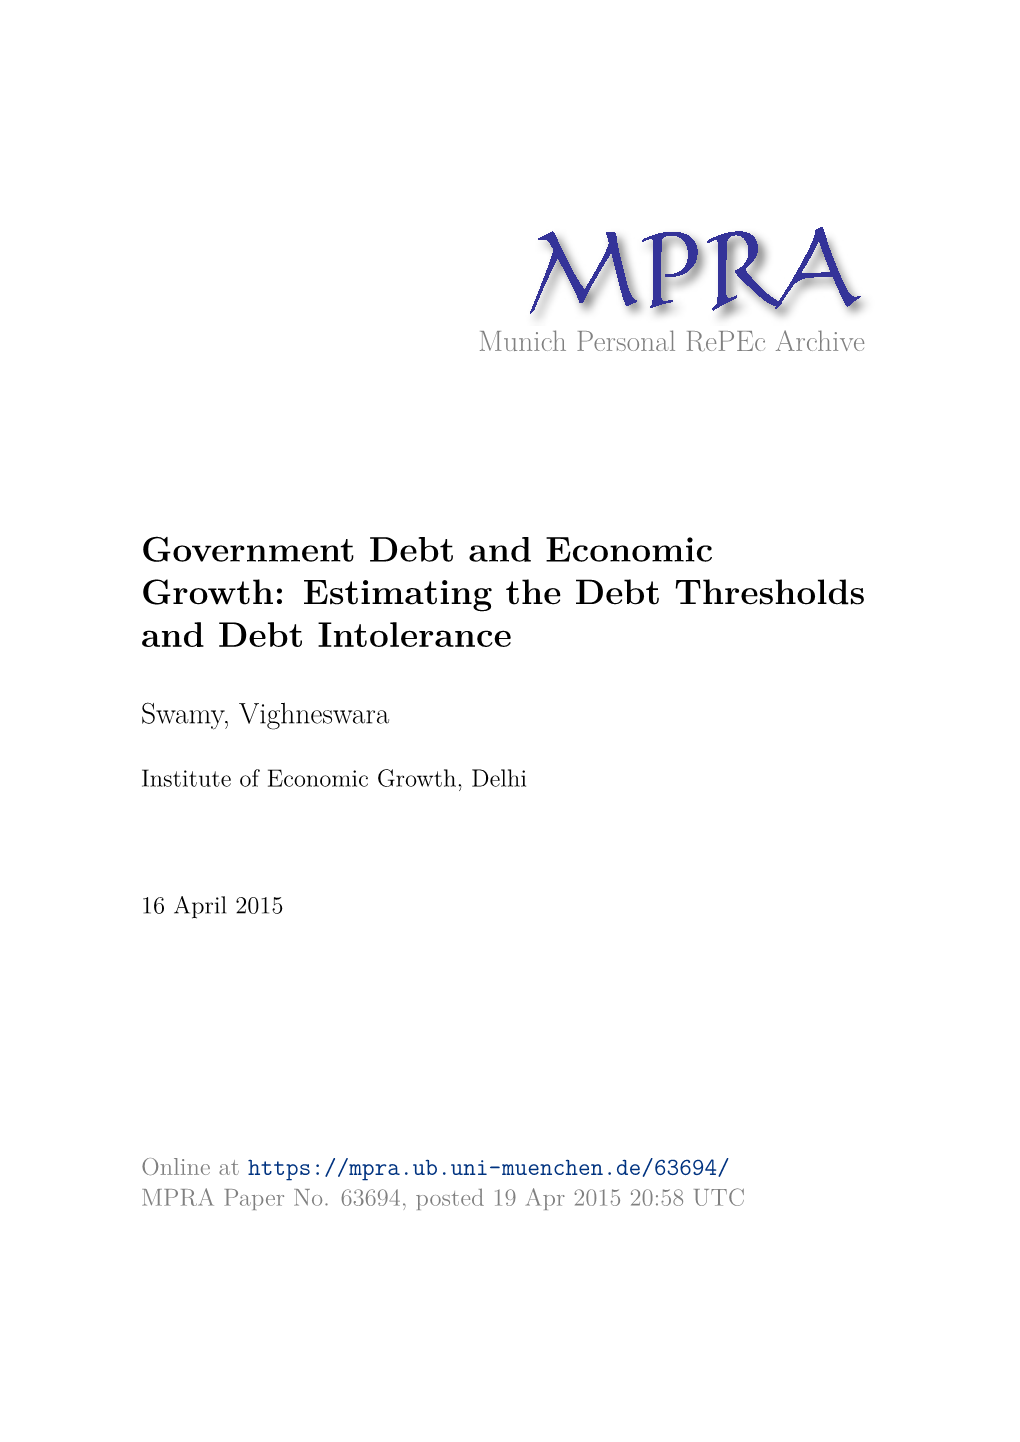 Government Debt and Economic Growth: Estimating the Debt Thresholds and Debt Intolerance